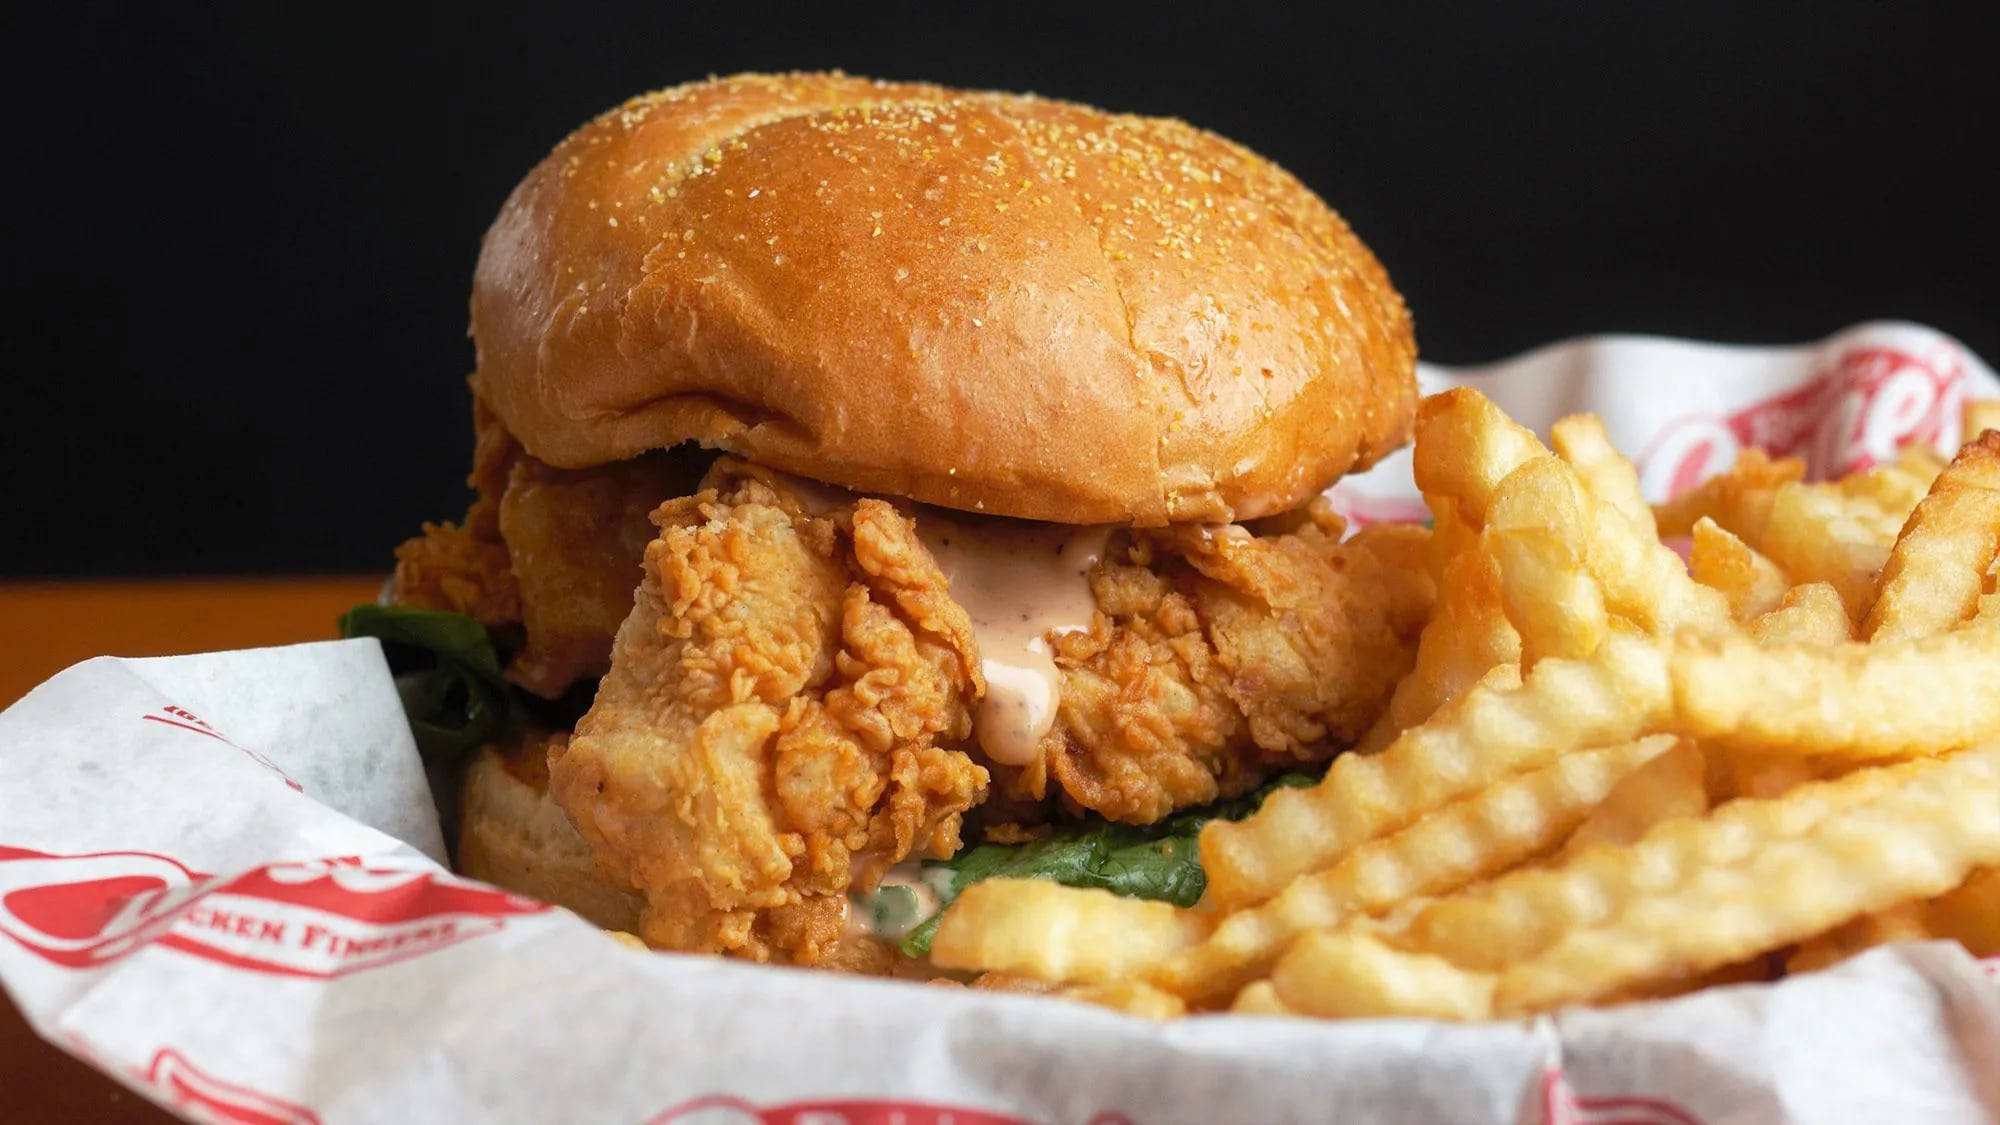 Raising Cane's chicken sandwich is really just a bun with a few fingers tossed on top.